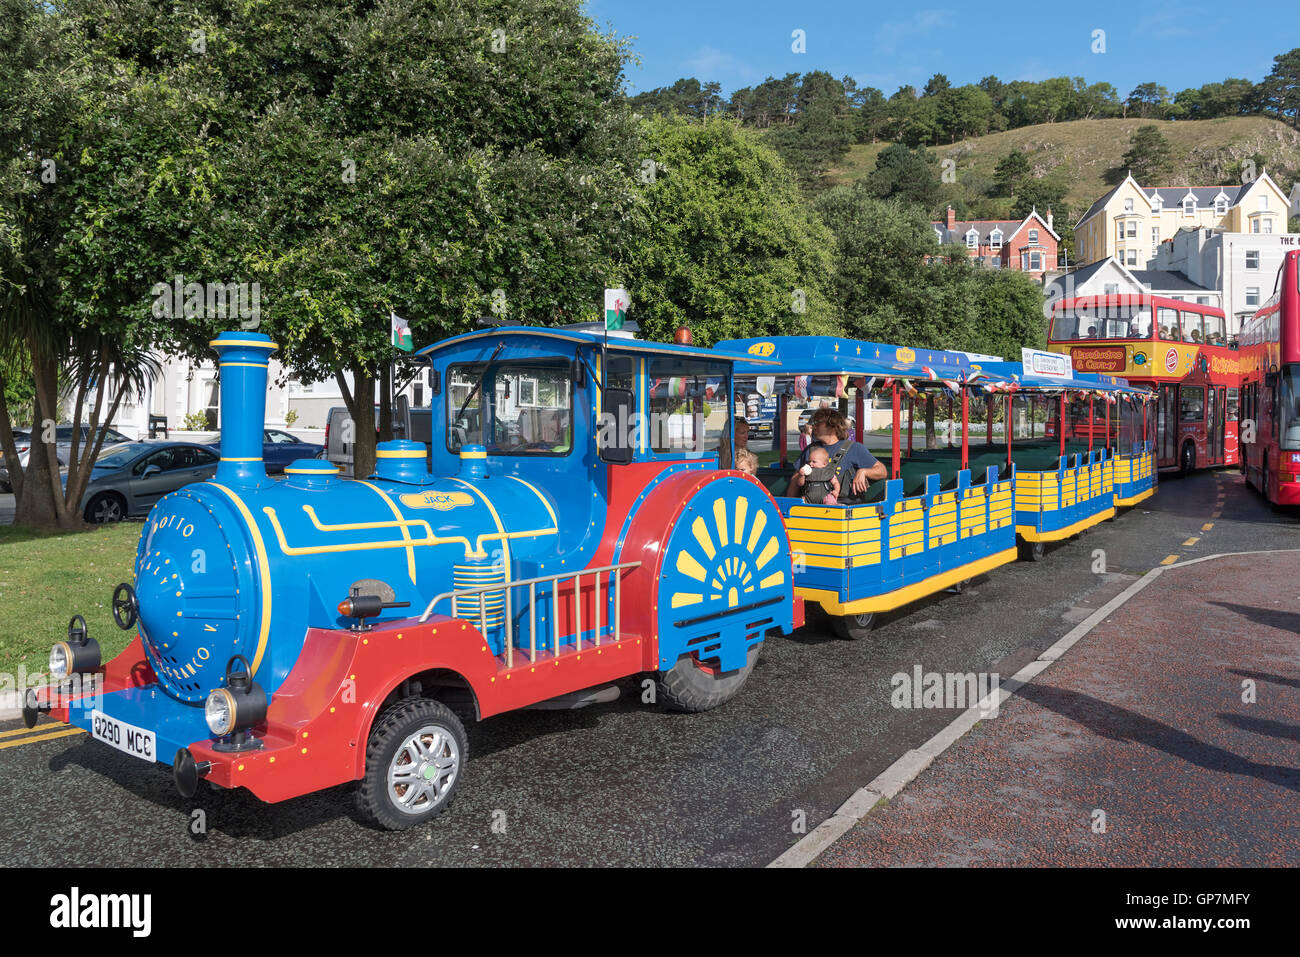 Llandudno. Clwyd North Wales. Tourist trains and buses Stock Photo